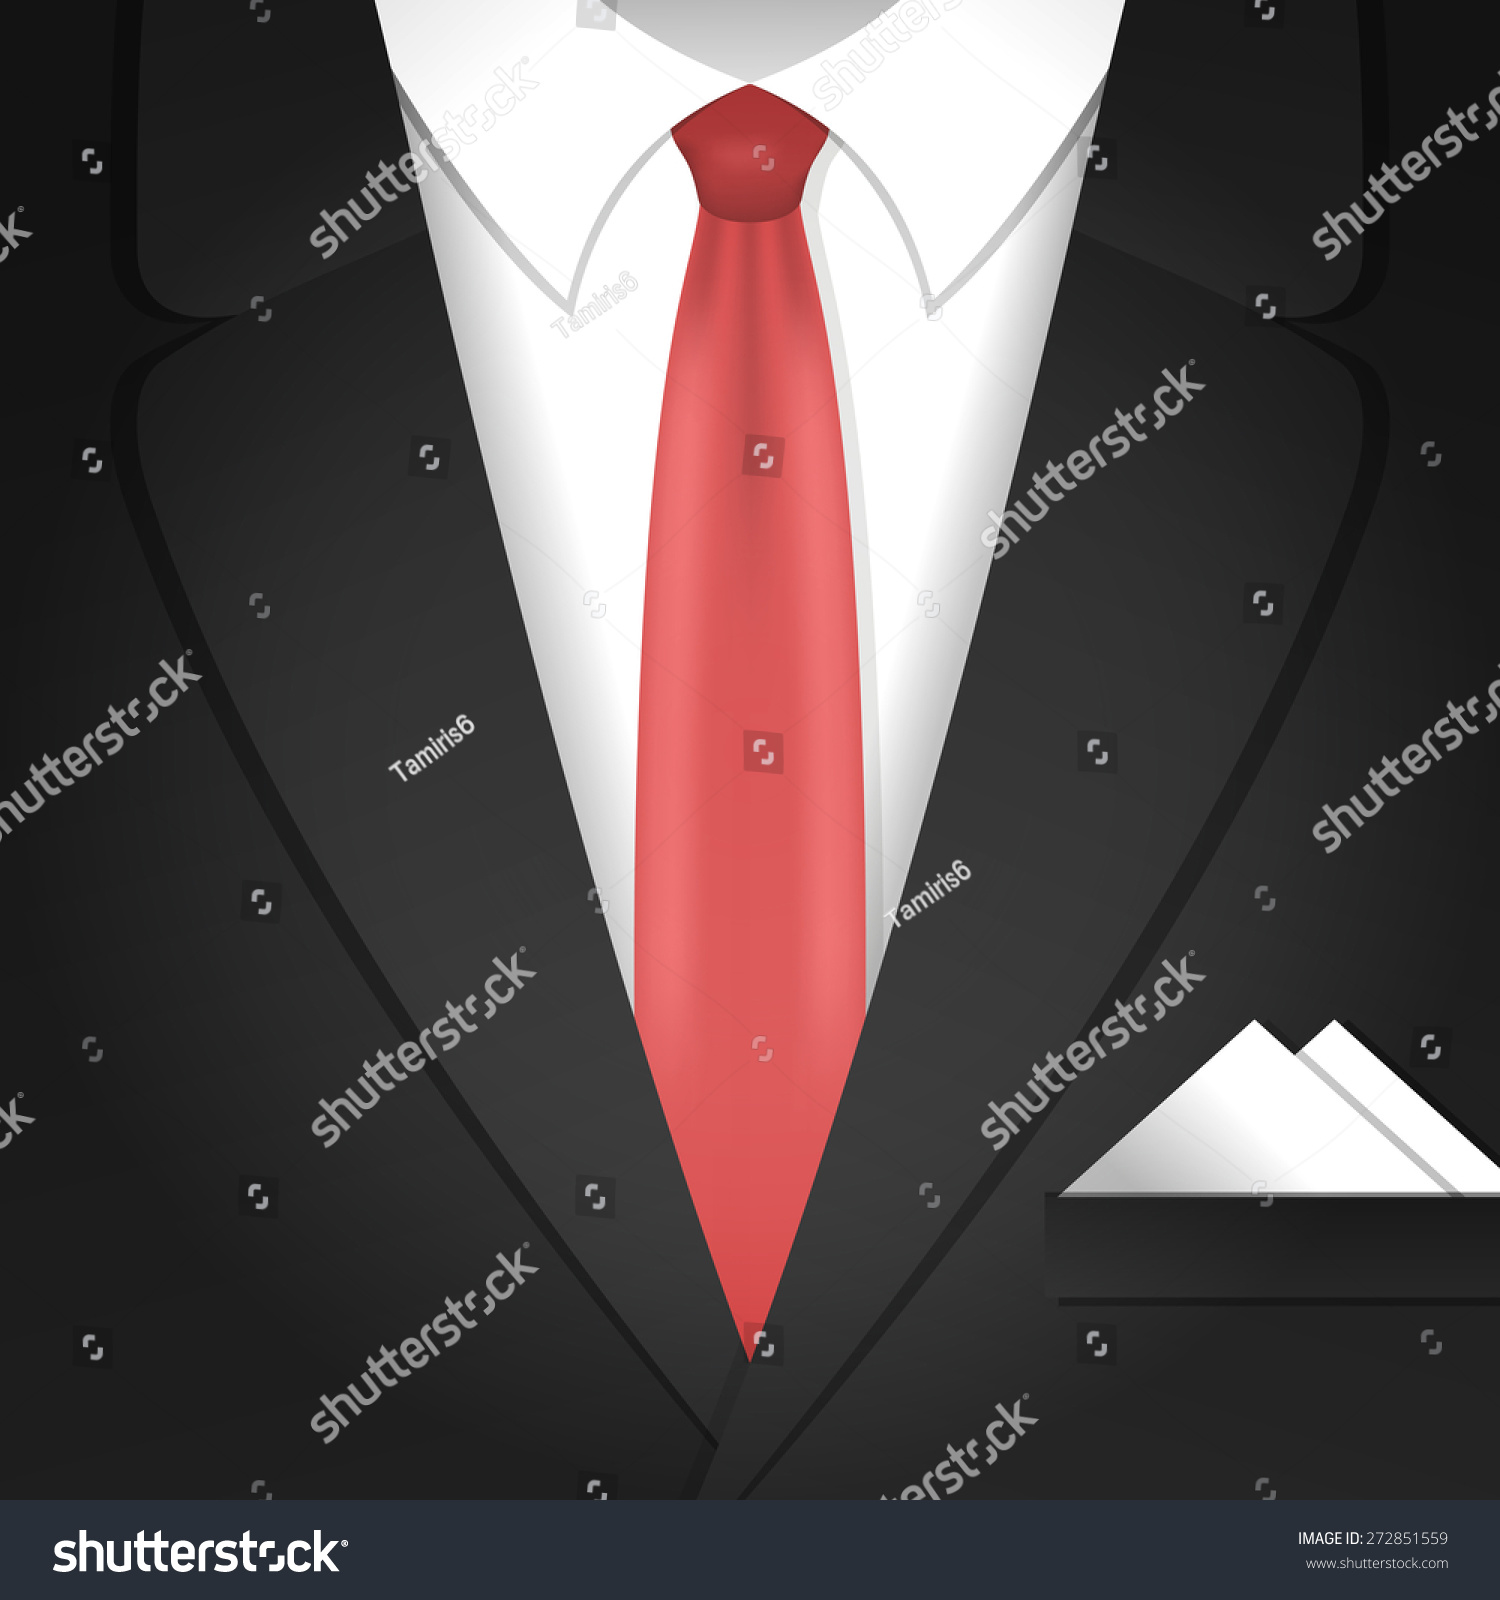 Vector Illustration With Classic Formal Male Clothing Suit And Red Tie ...